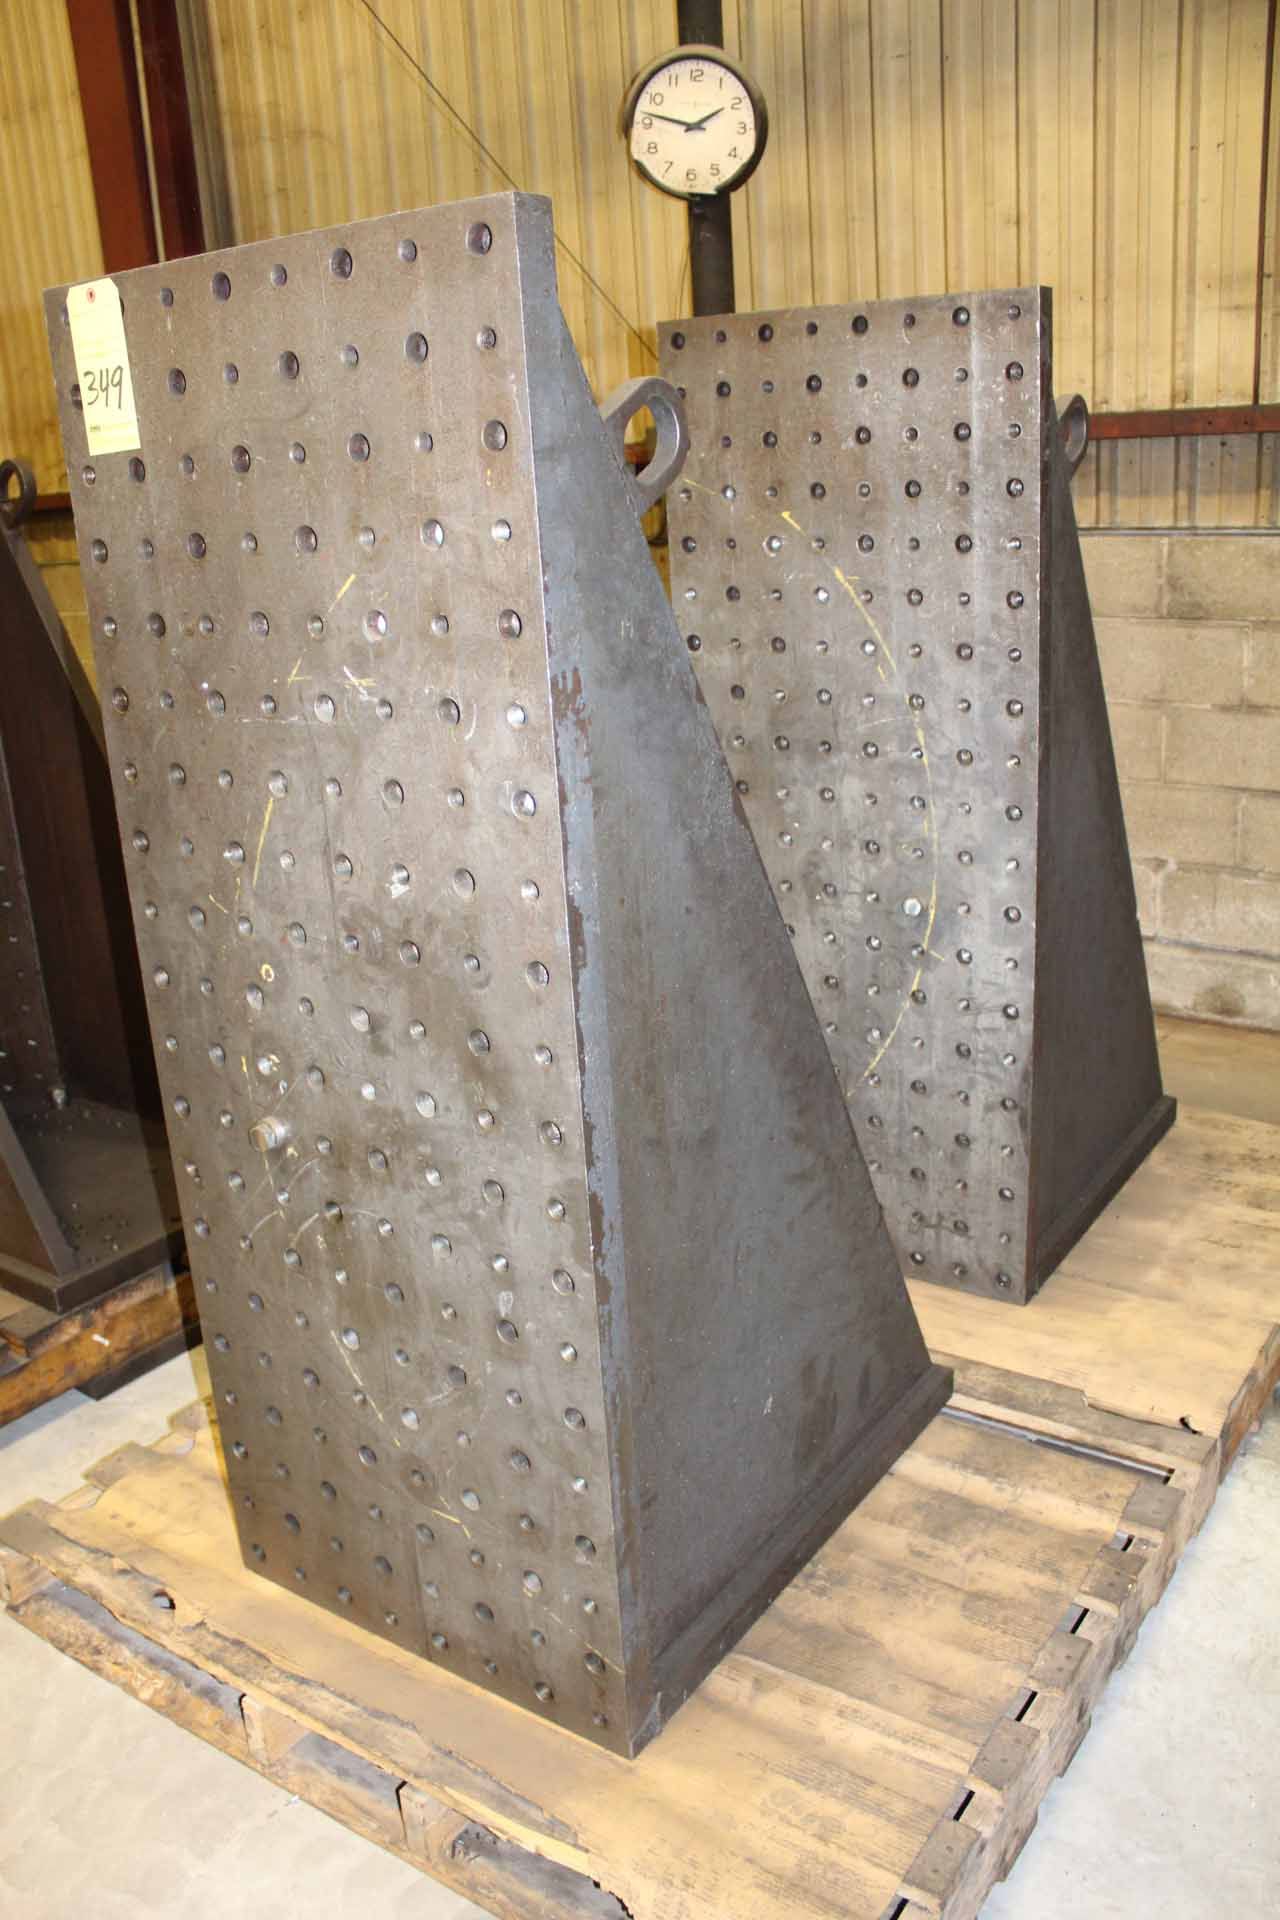 LOT OF ANGLE PLATES (1 Pair), 24"W. x 60" ht. x 36" dp., fabricated drilled & tapped, w/locating